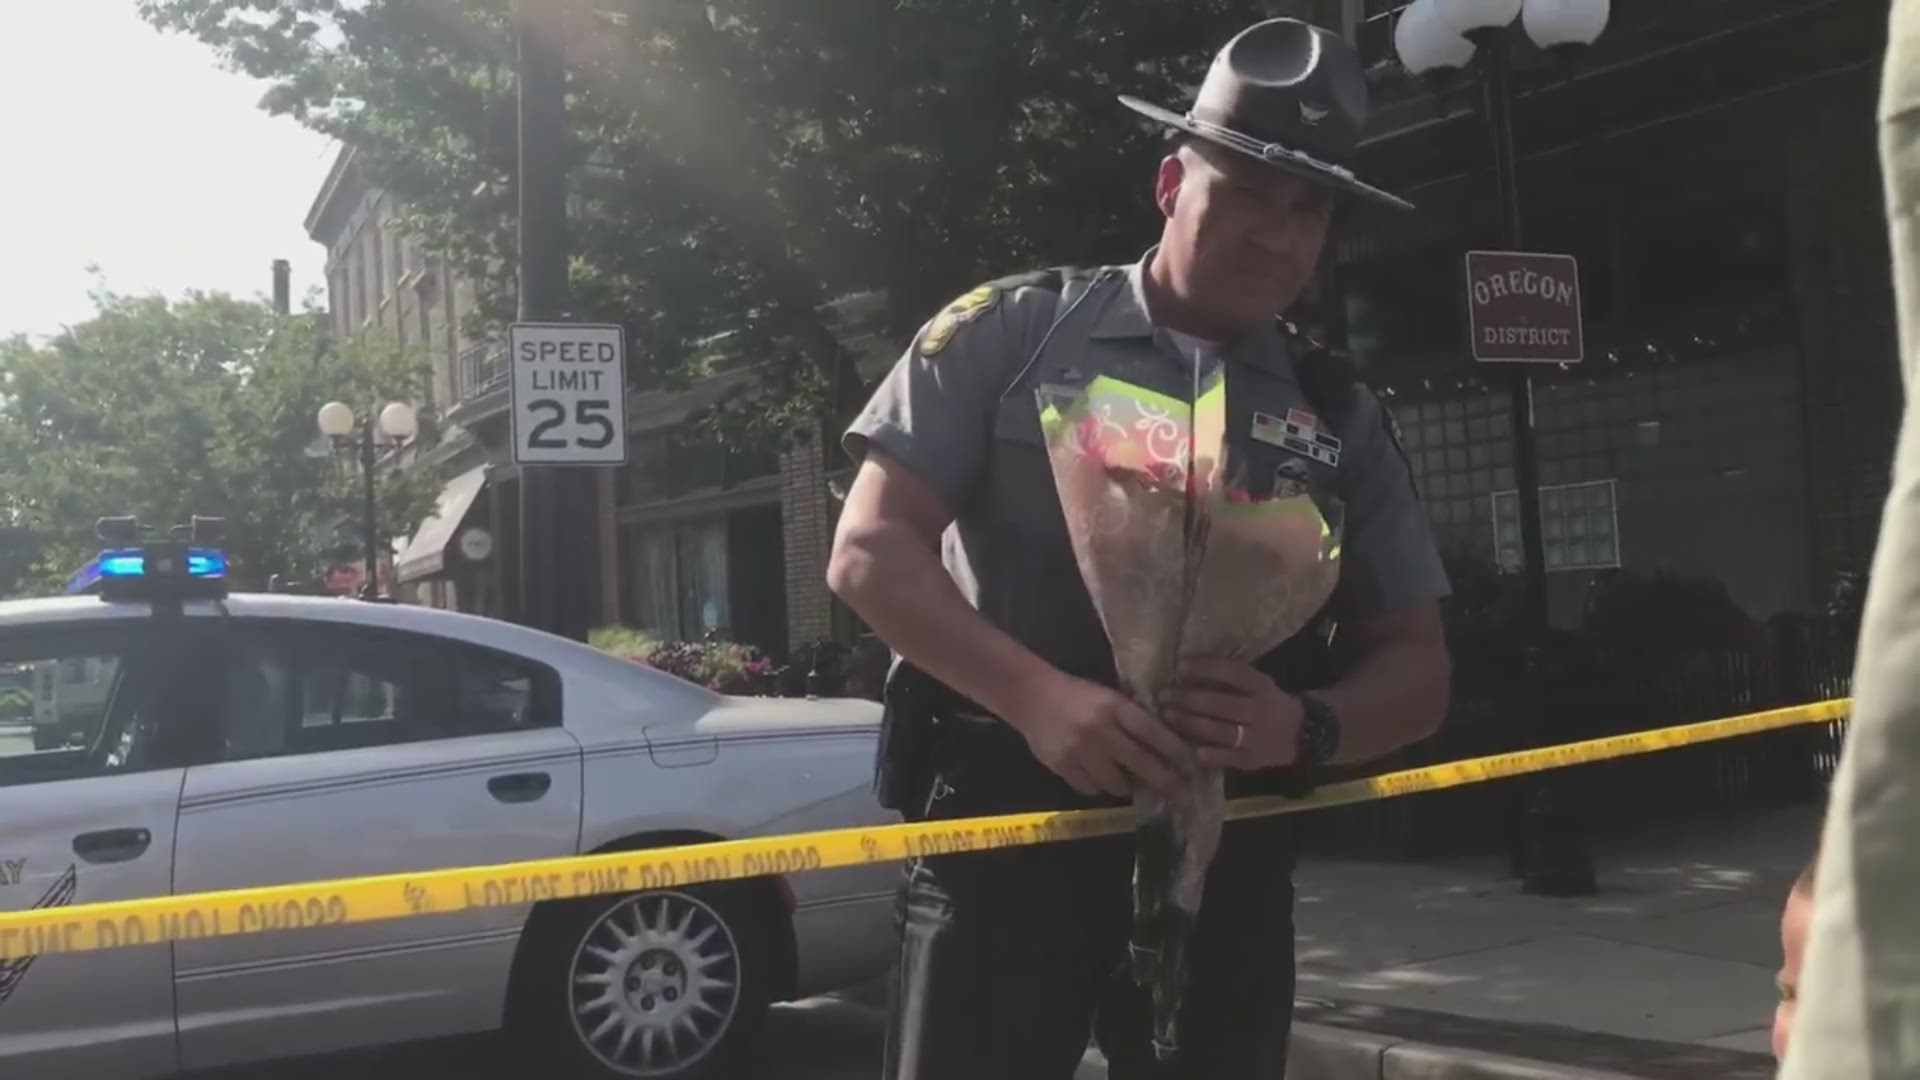 On a day when we saw the worst humanity has to offer, here’s some of the best: a mother and her young children give an Ohio State Highway Patrol trooper flowers to say thank you for their service here in Dayton.